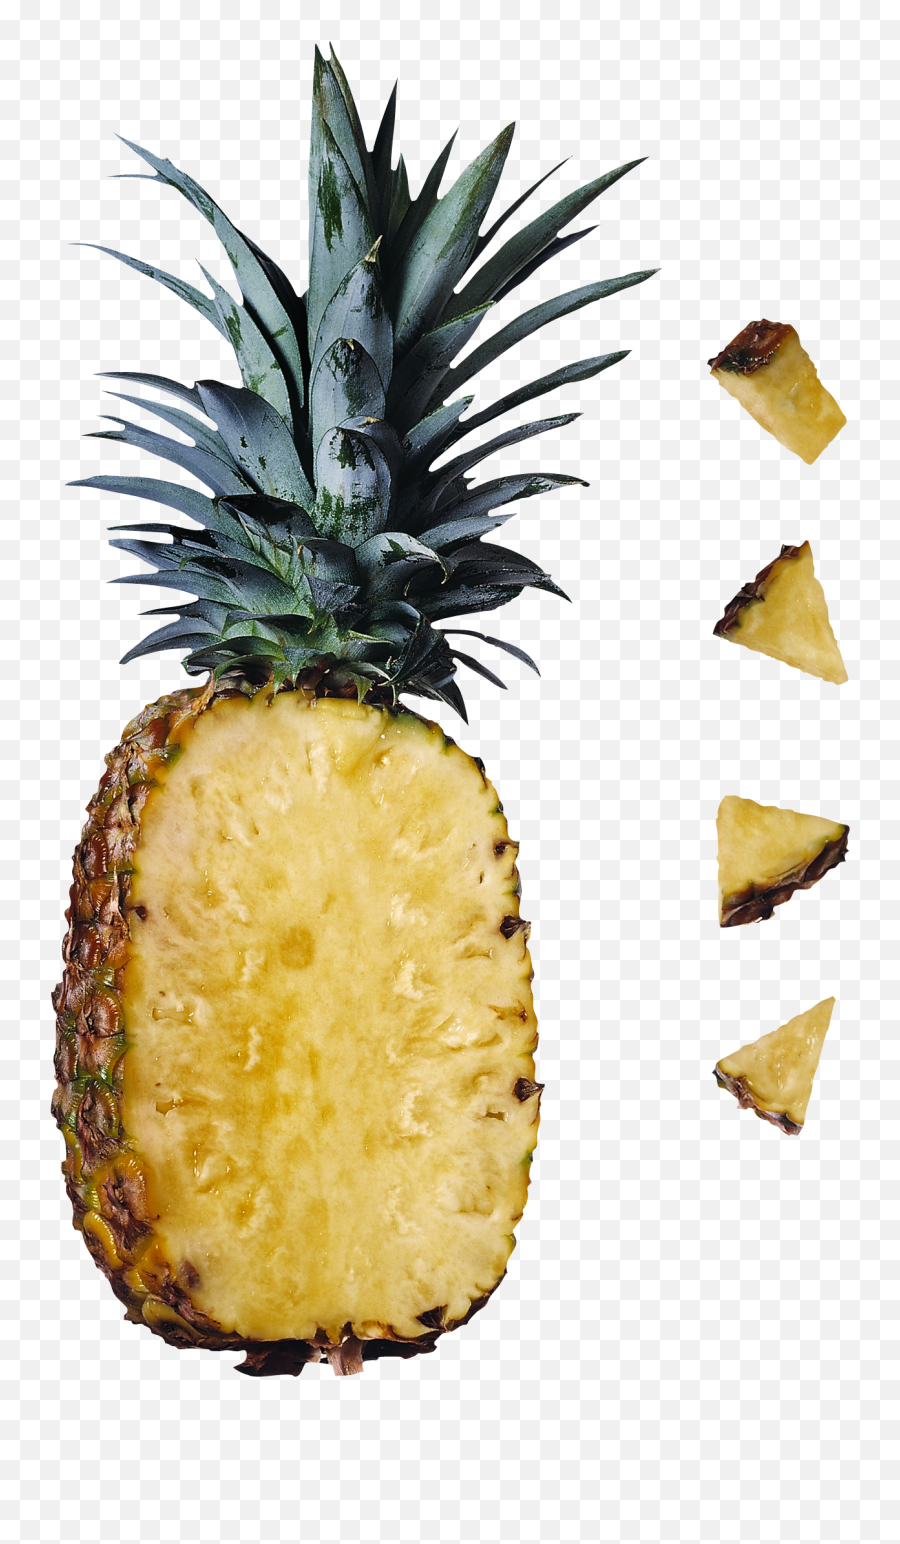 Pineapple Png Image Free Download - Png,Pineapple Transparent